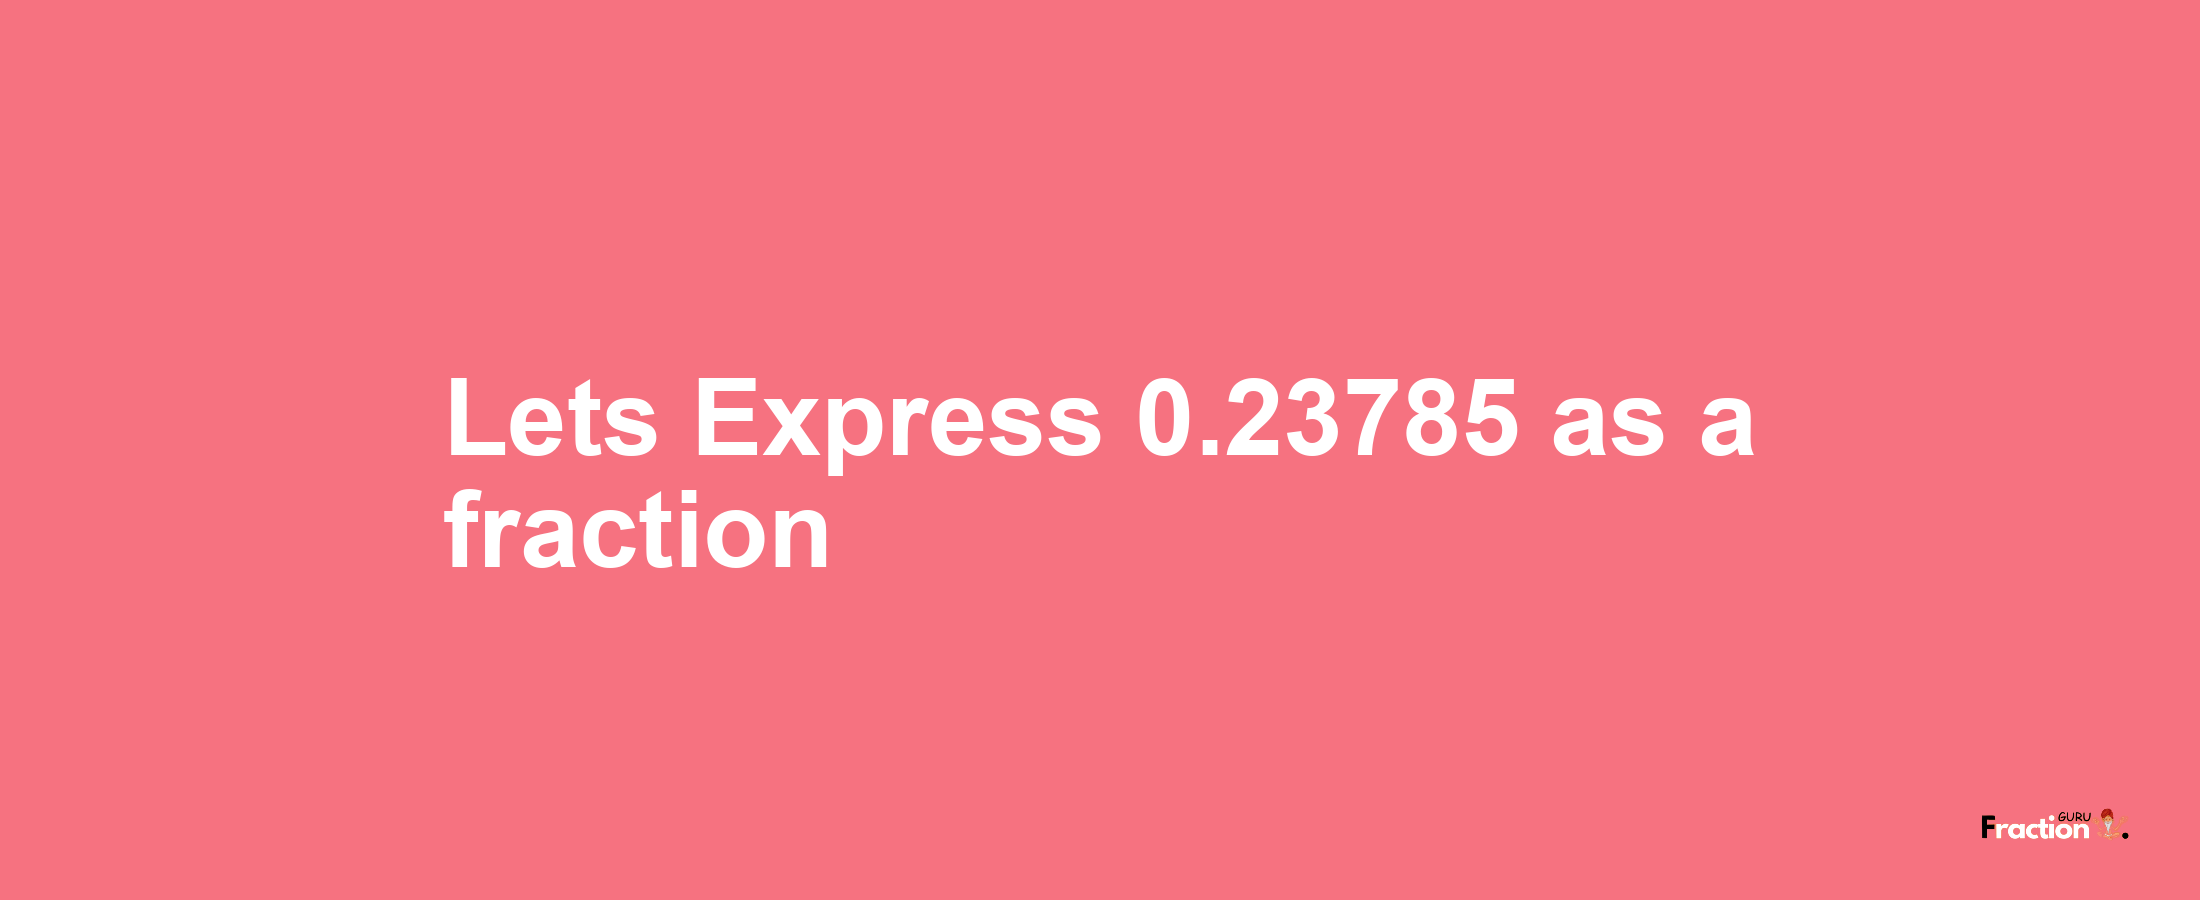 Lets Express 0.23785 as afraction